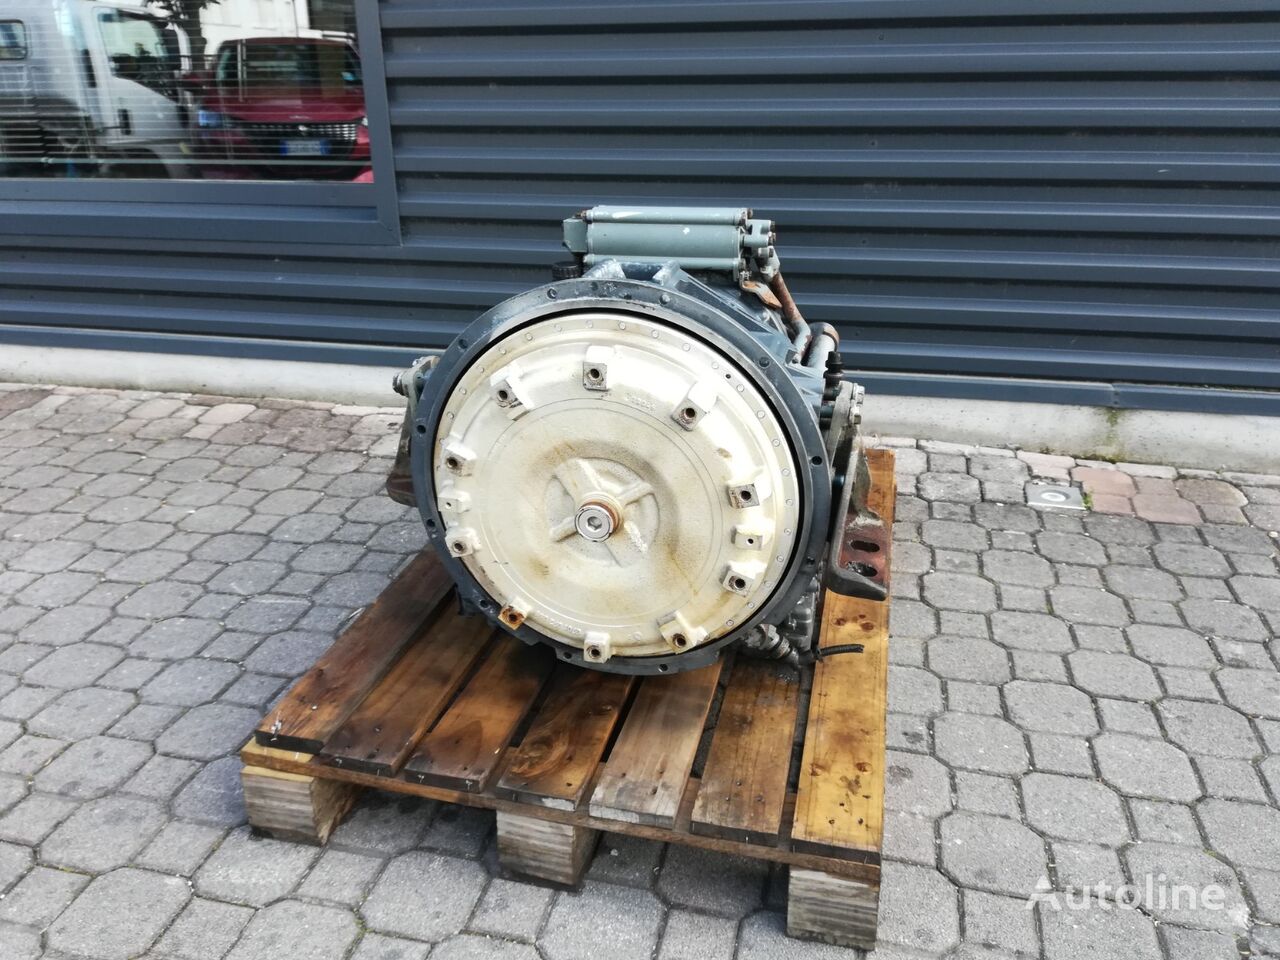 ZF 6HP602C ECOMAT2 AUTOMATIC 6HP602 C
ZF gearbox for Mercedes-Benz Atego - Axor - Setra bus